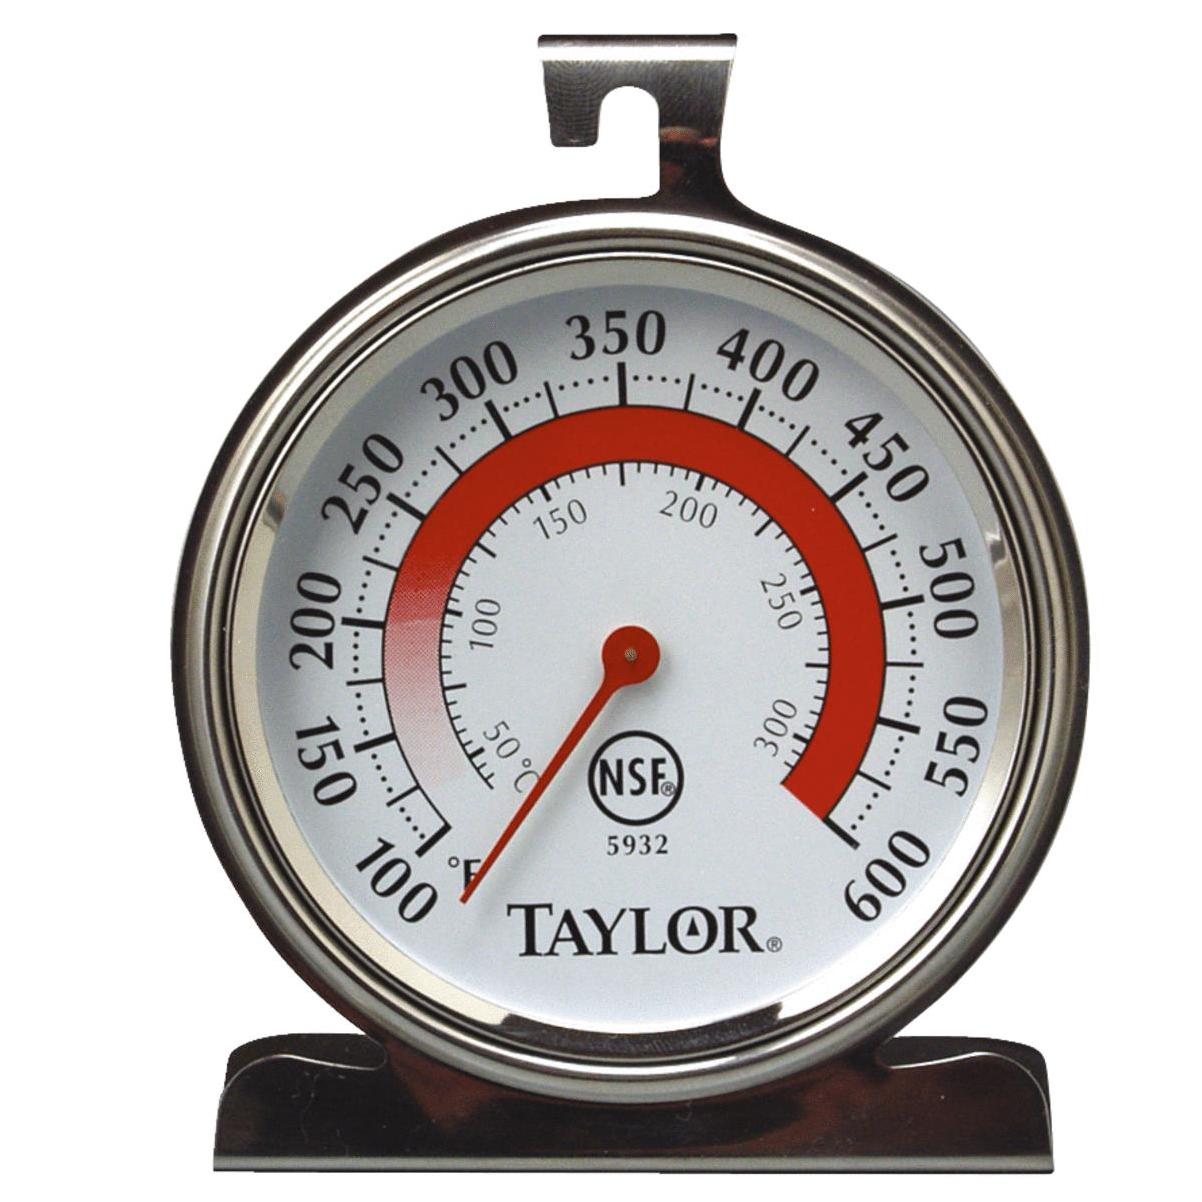 Taylor Just Another Minute Timer - 077784027363